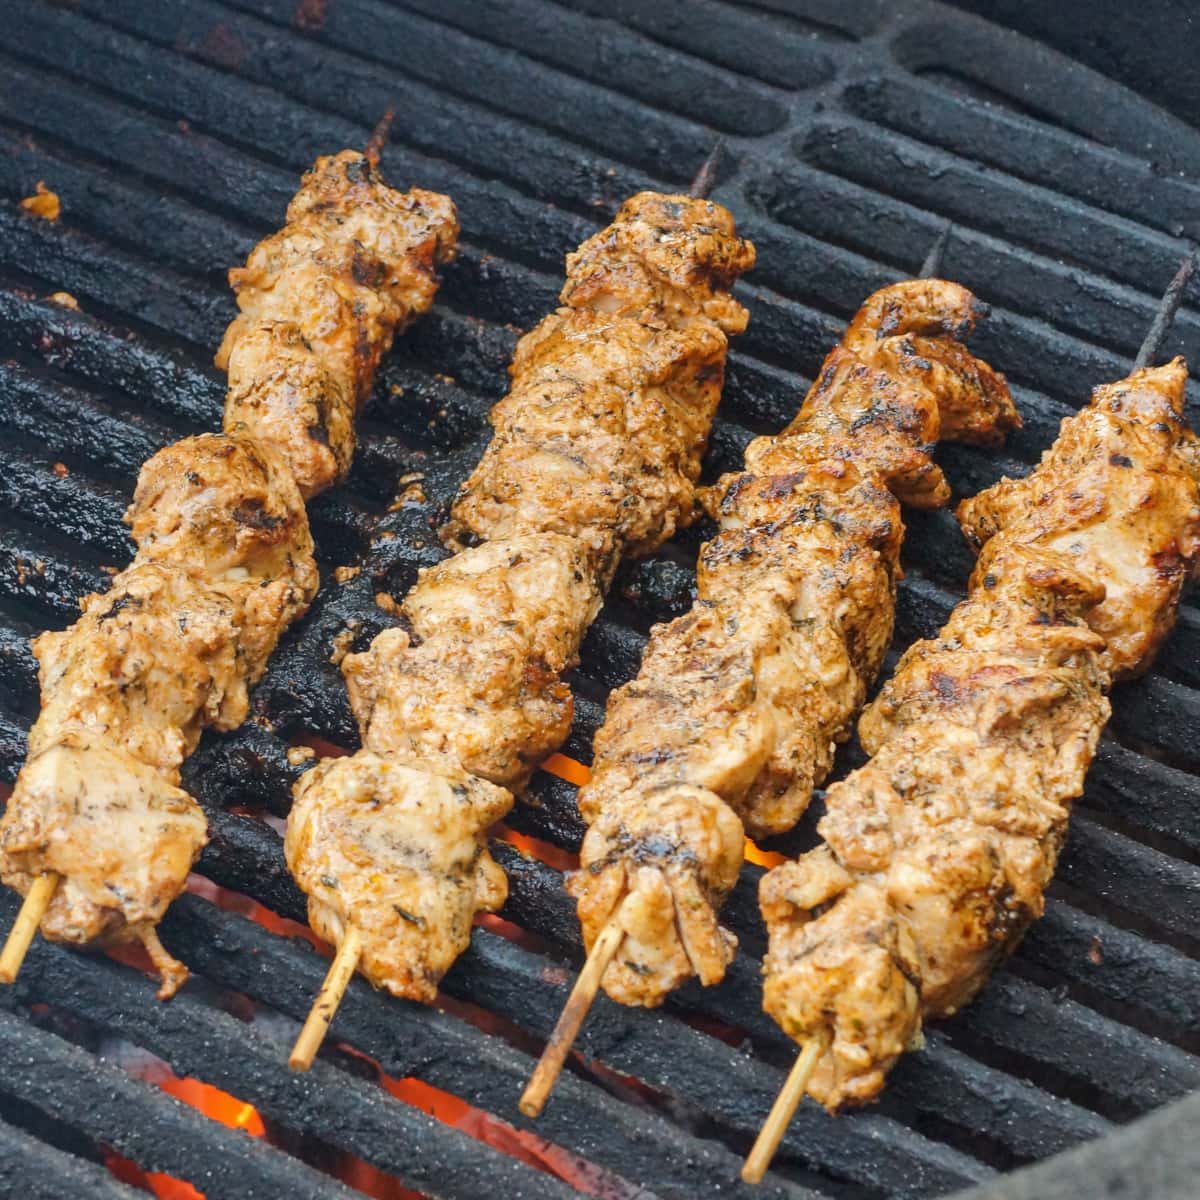 Marinated Lebanese Chicken Skewers on a Big Green Egg grill.